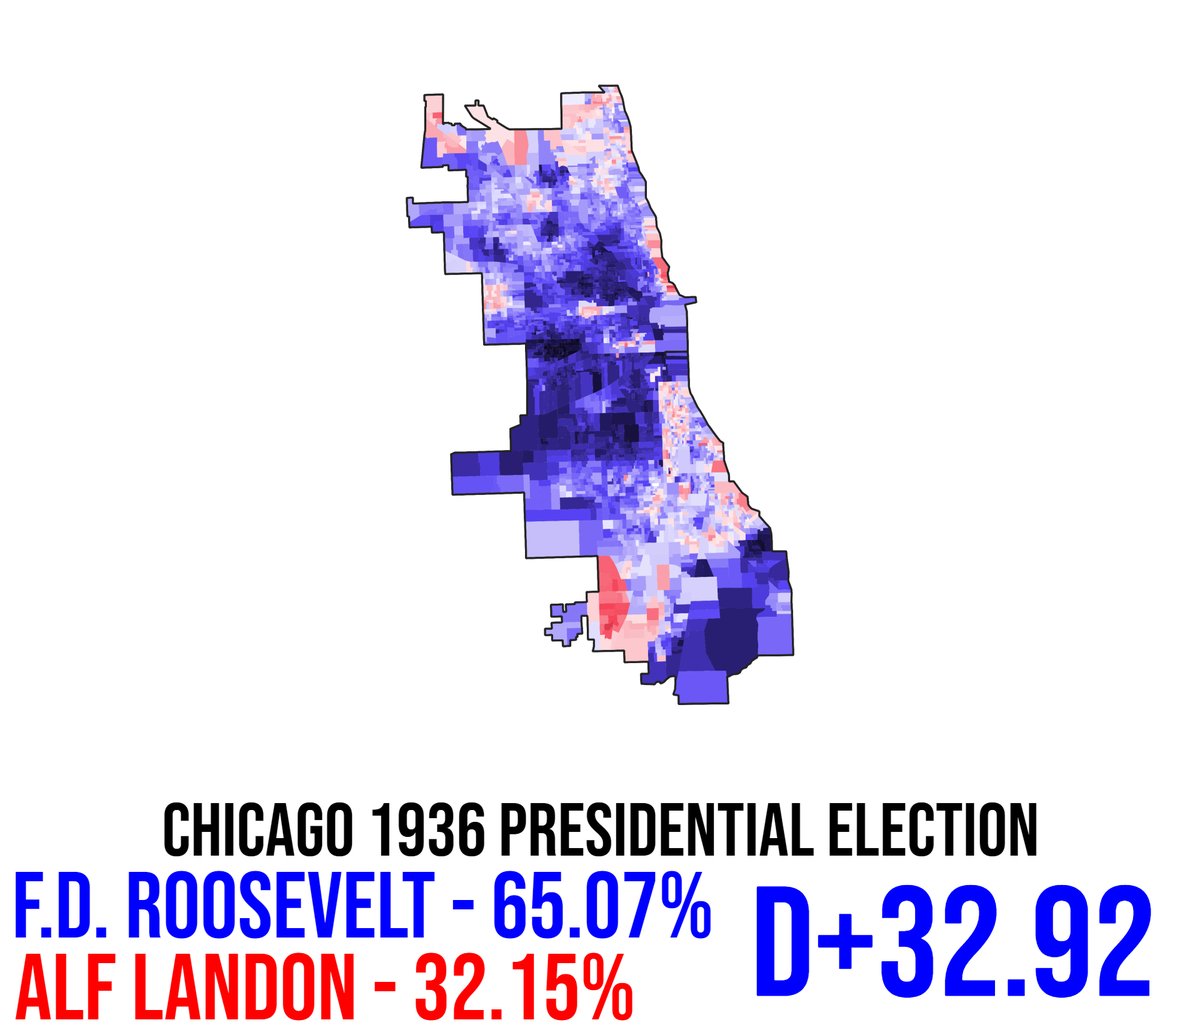 Back in 1936, FDR won the city of Chicago in his run for president by nearly 33 points, which was better than his margin of 18 points in the state of Illinois and his margin of 24 points nationwide. #ElectionTwitter